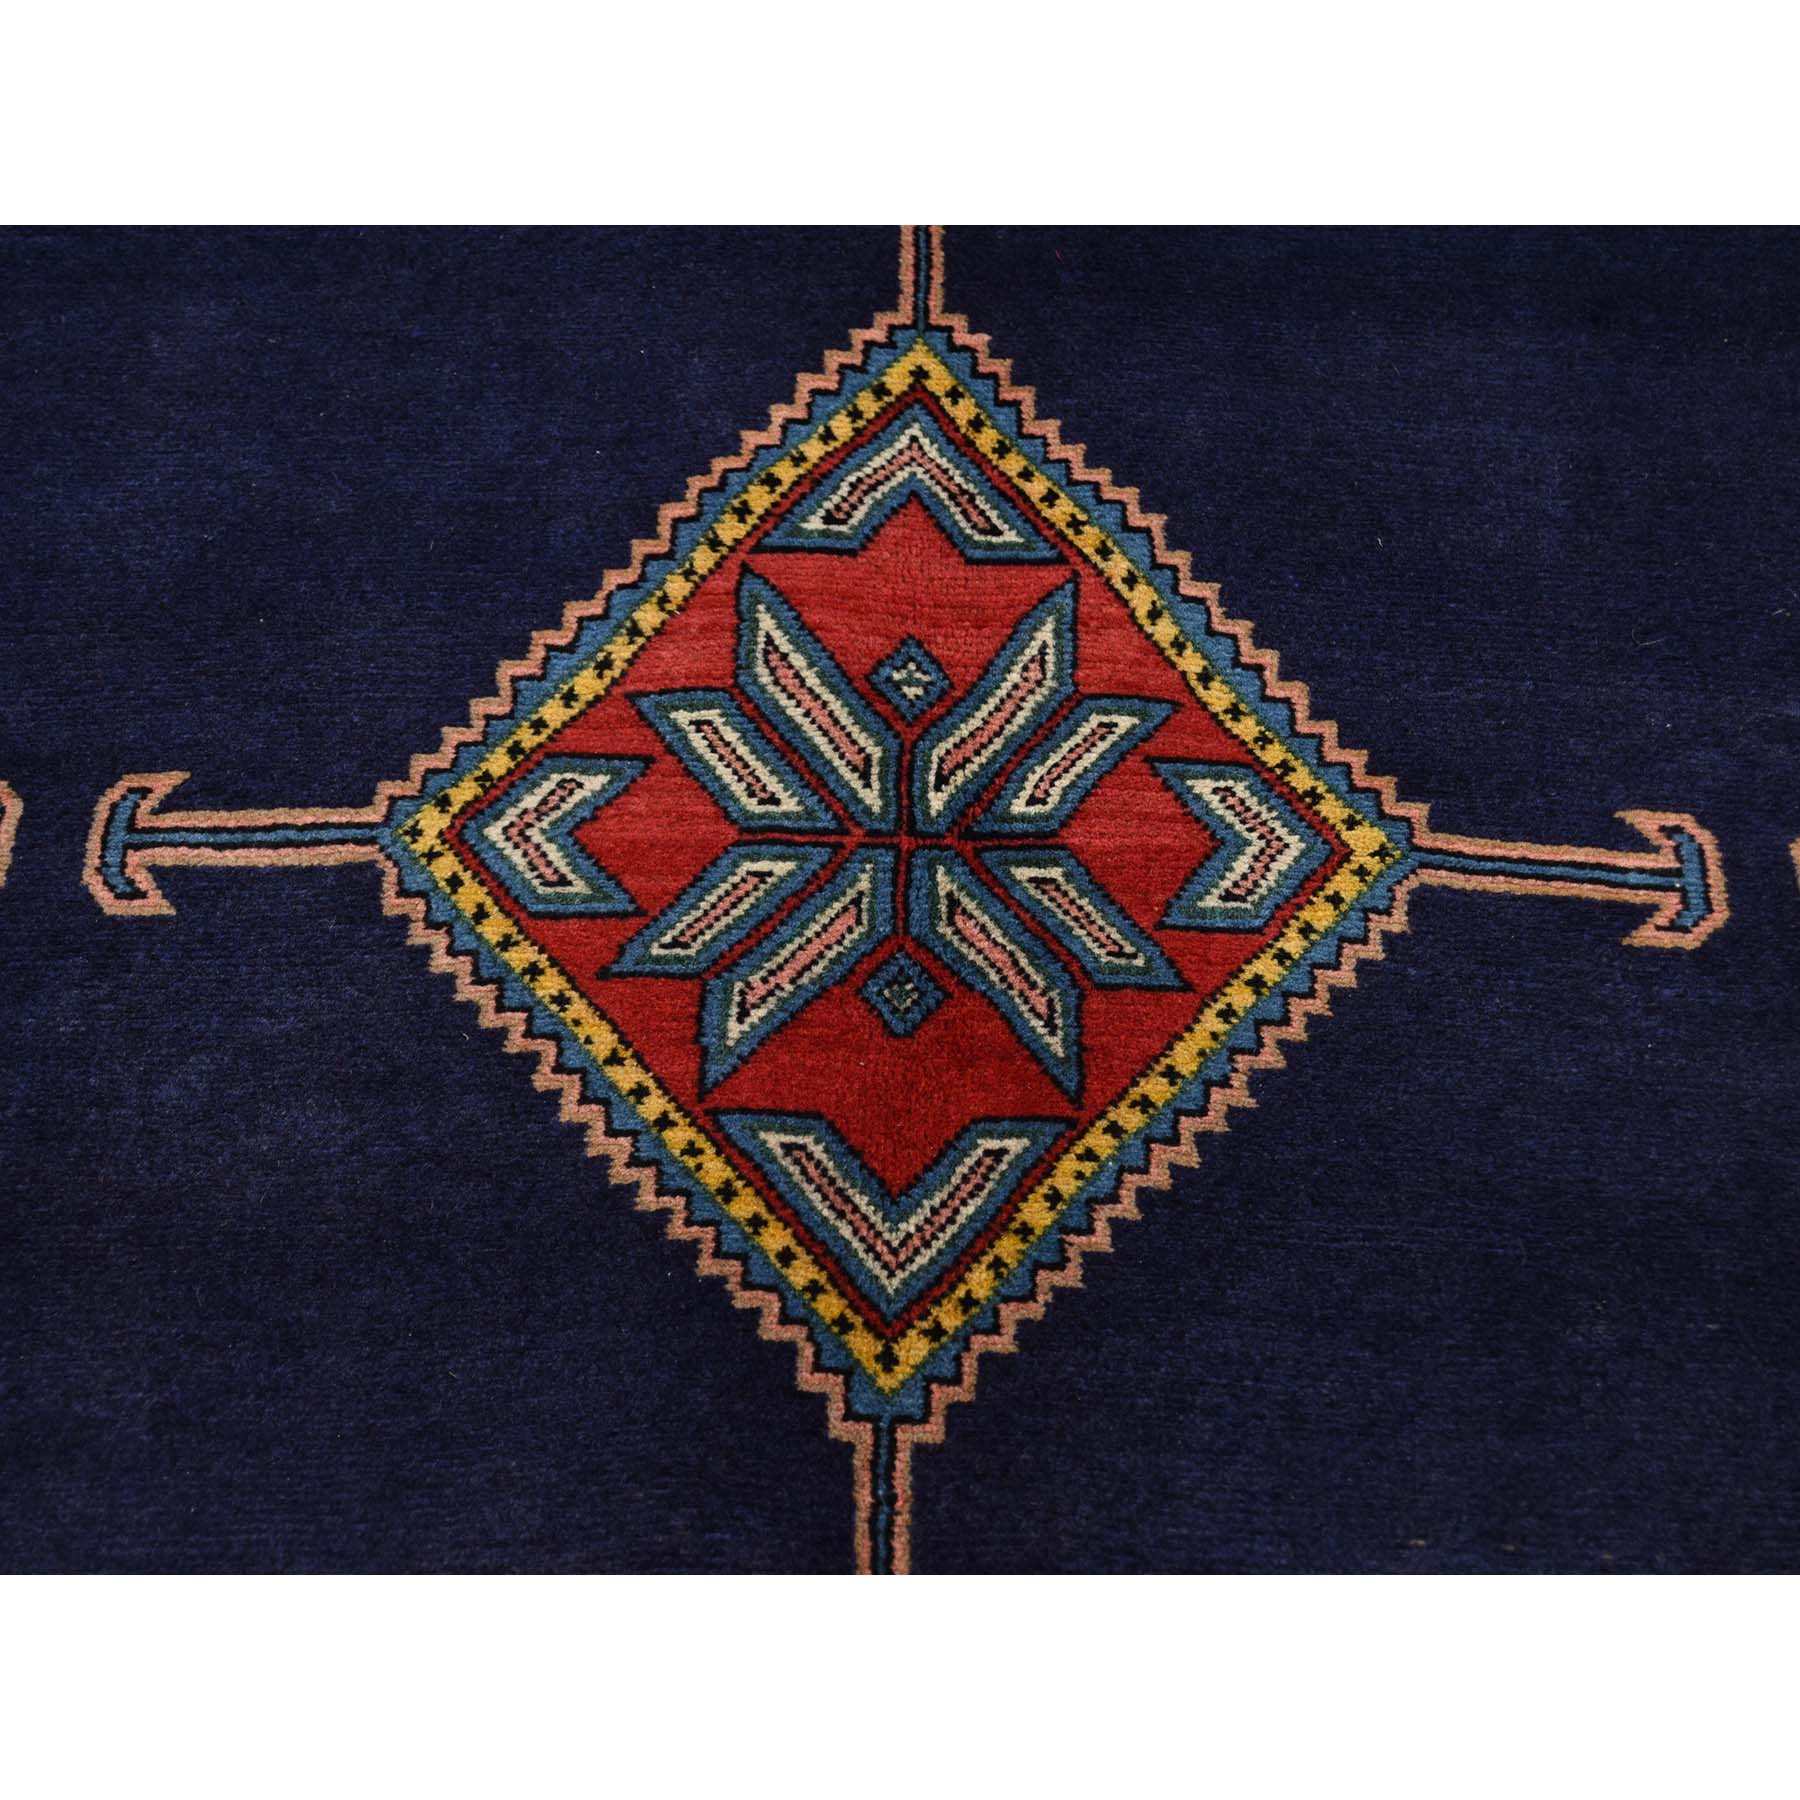 traditional Wool Hand-Knotted Area Rug 5'1